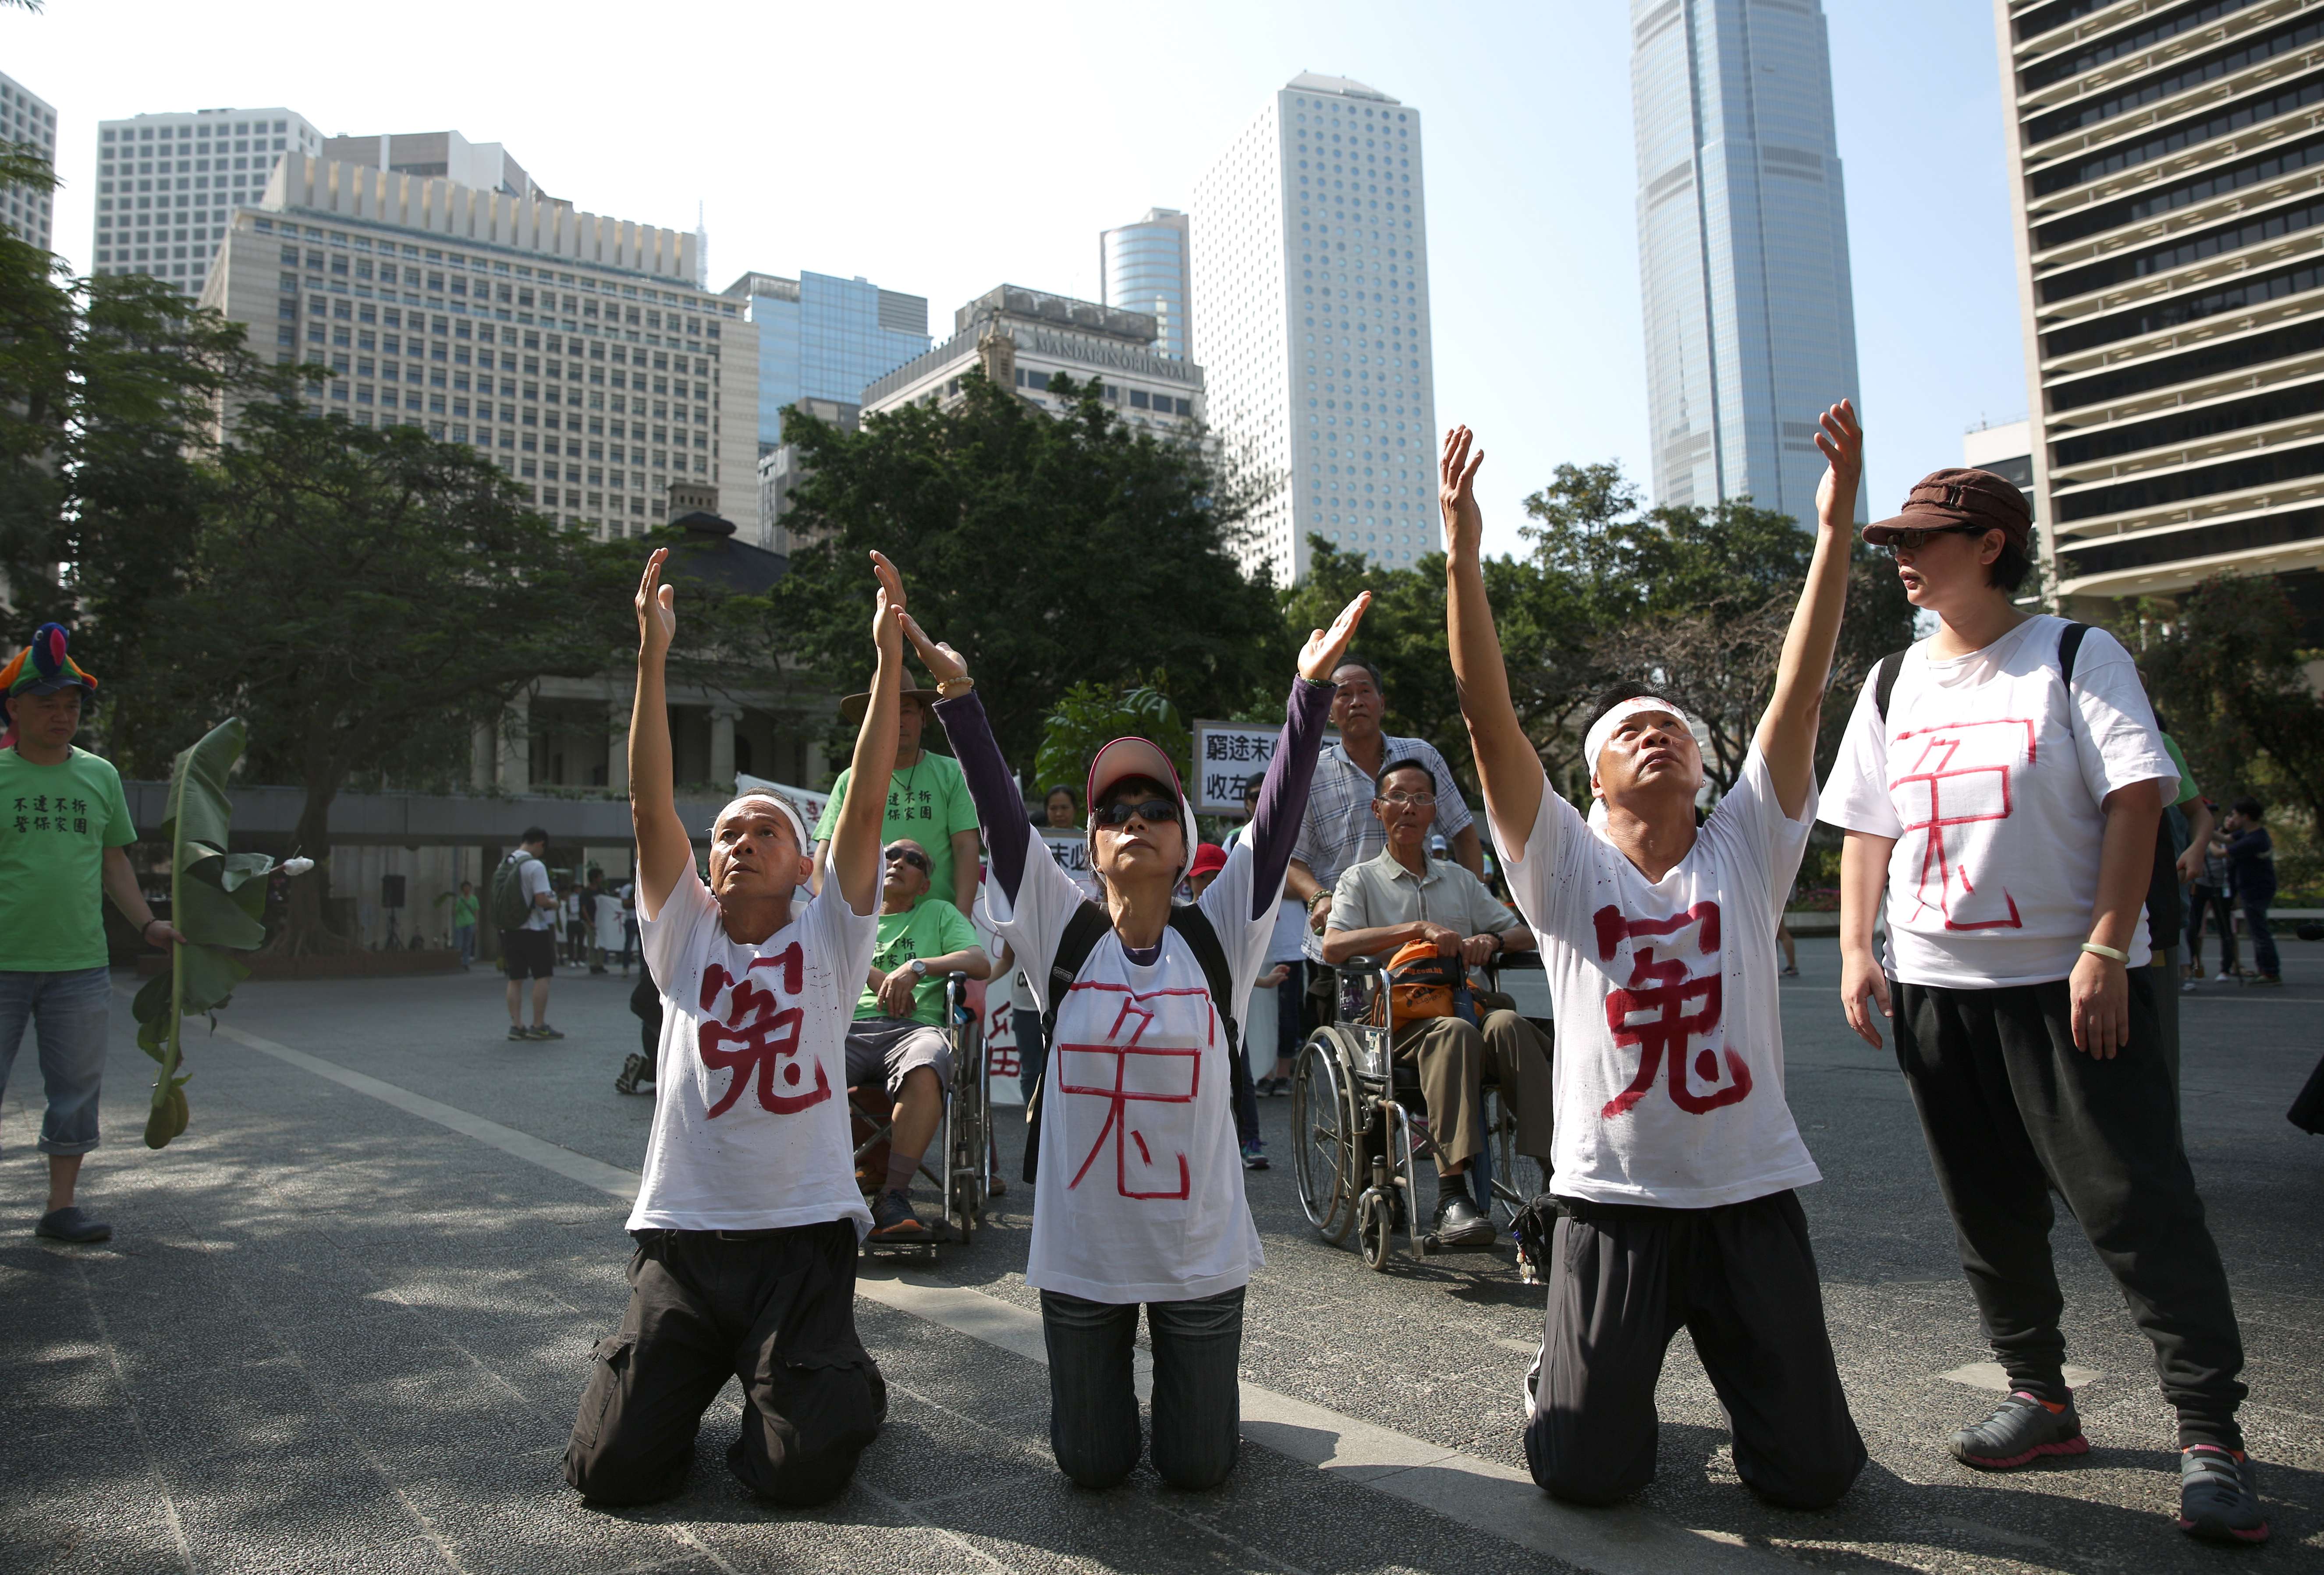 Wang Chau villagers get down on their knees during their protest march to Carrie Lam’s office. Photo: Sam Tsang